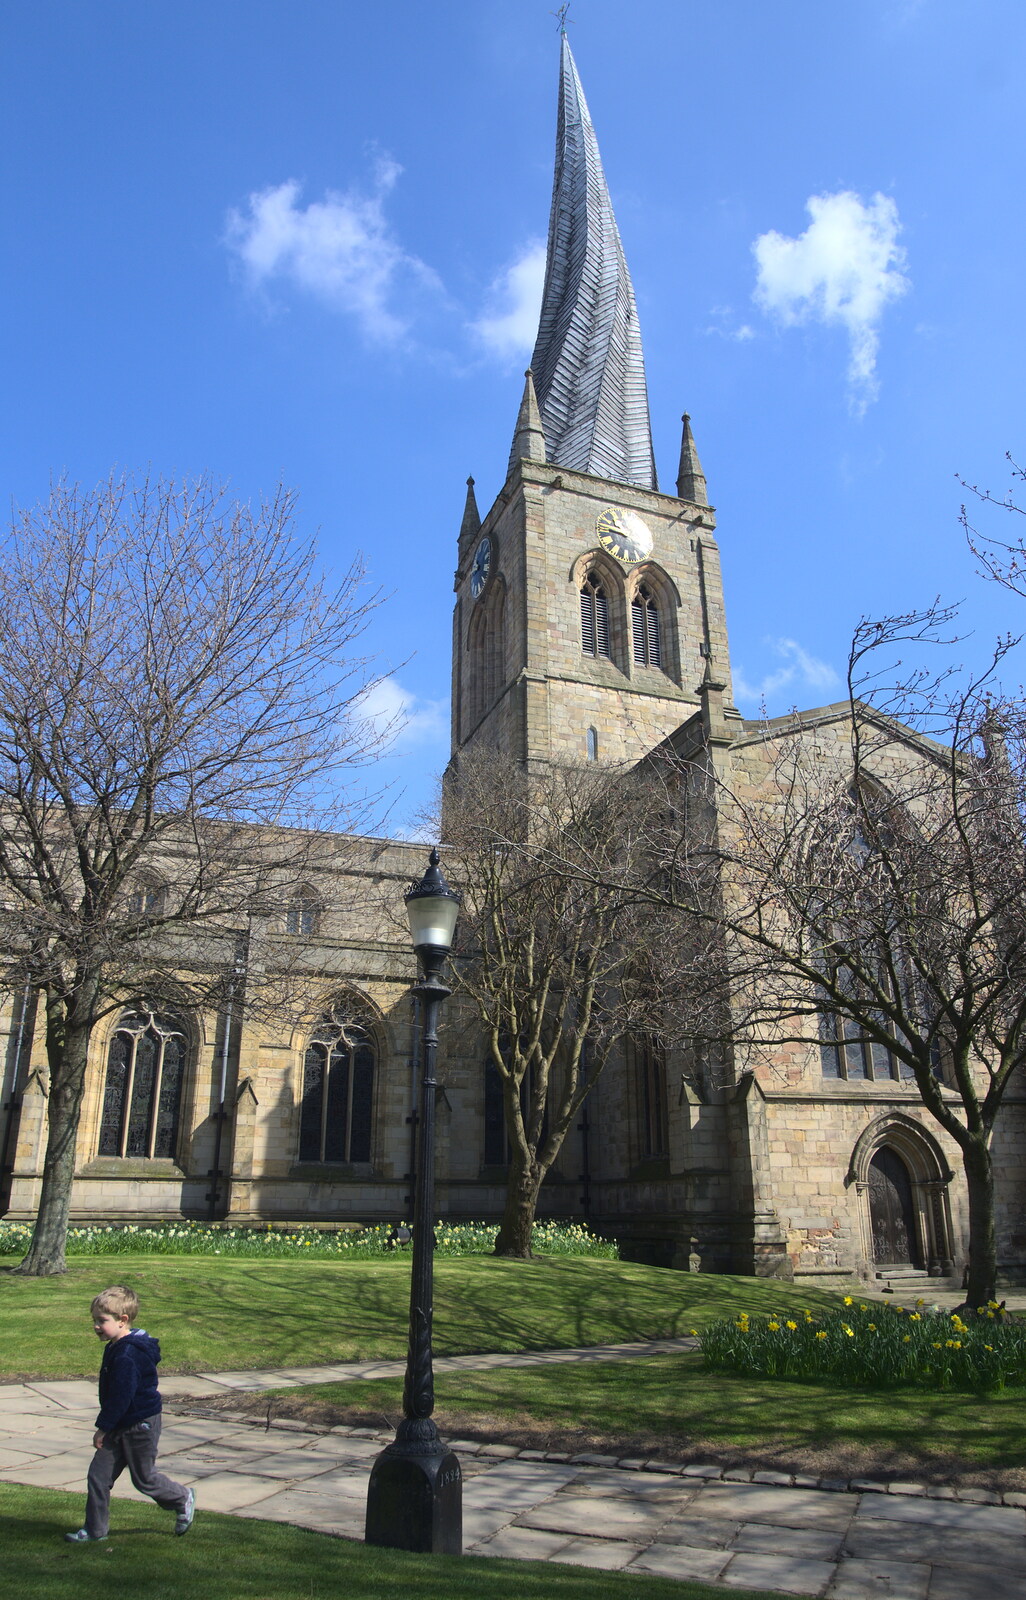 Fred runs around the churchyard from Chesterfield and the Twisty Spire, Derbyshire - 19th April 2013